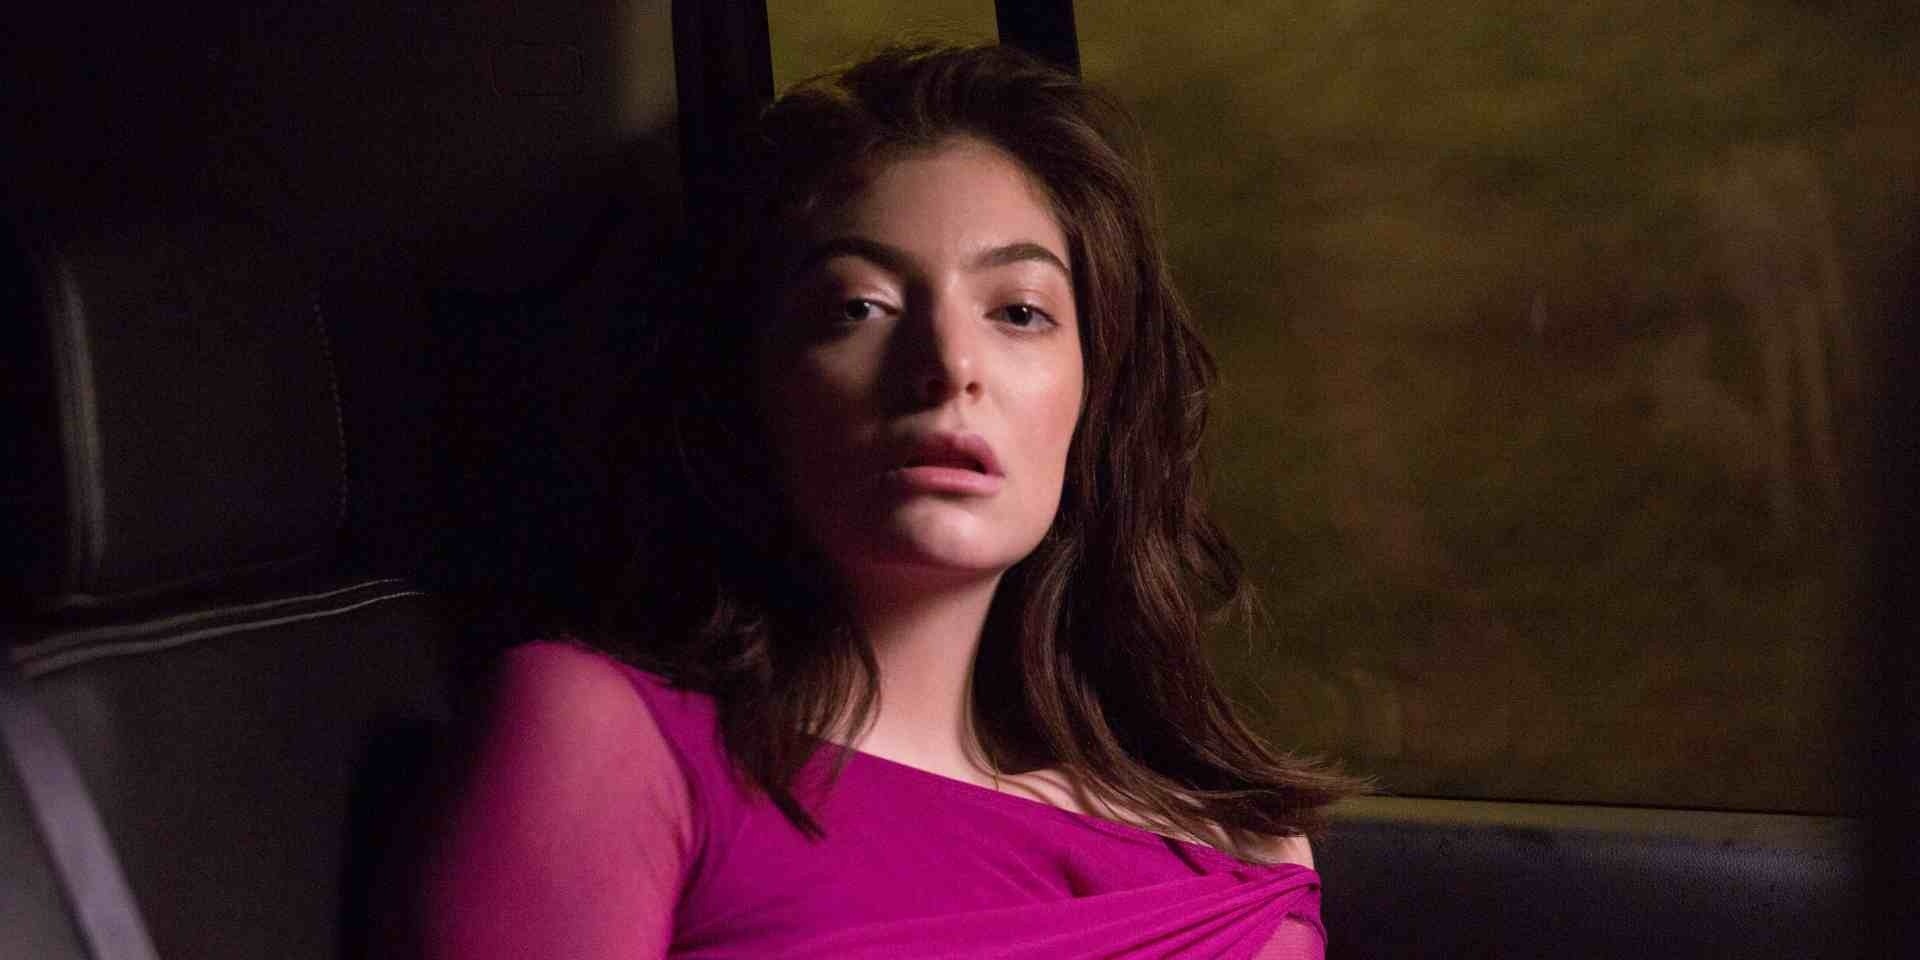 Lorde gives confirmation that her new album is on the way